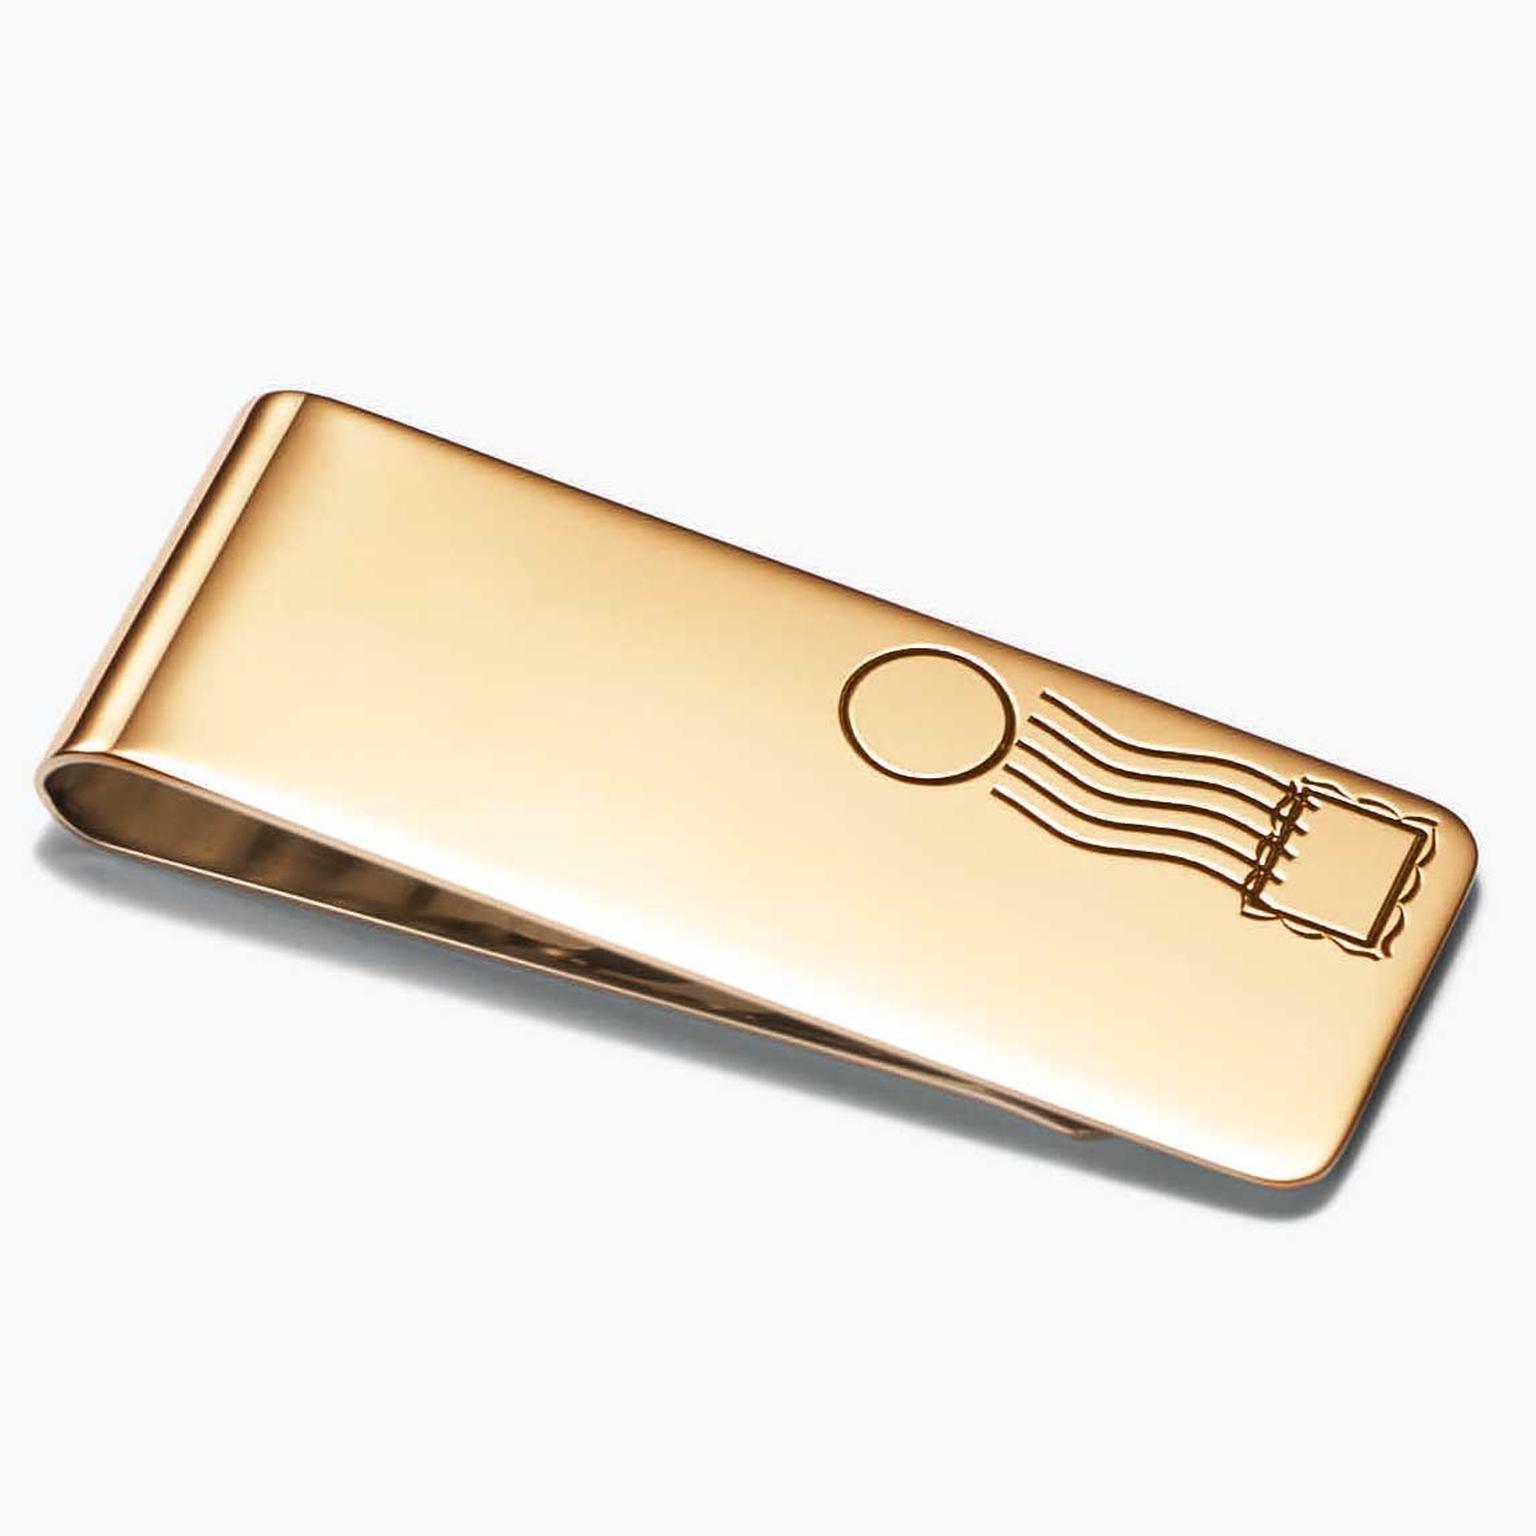 TIffany gold Postage money clip from 